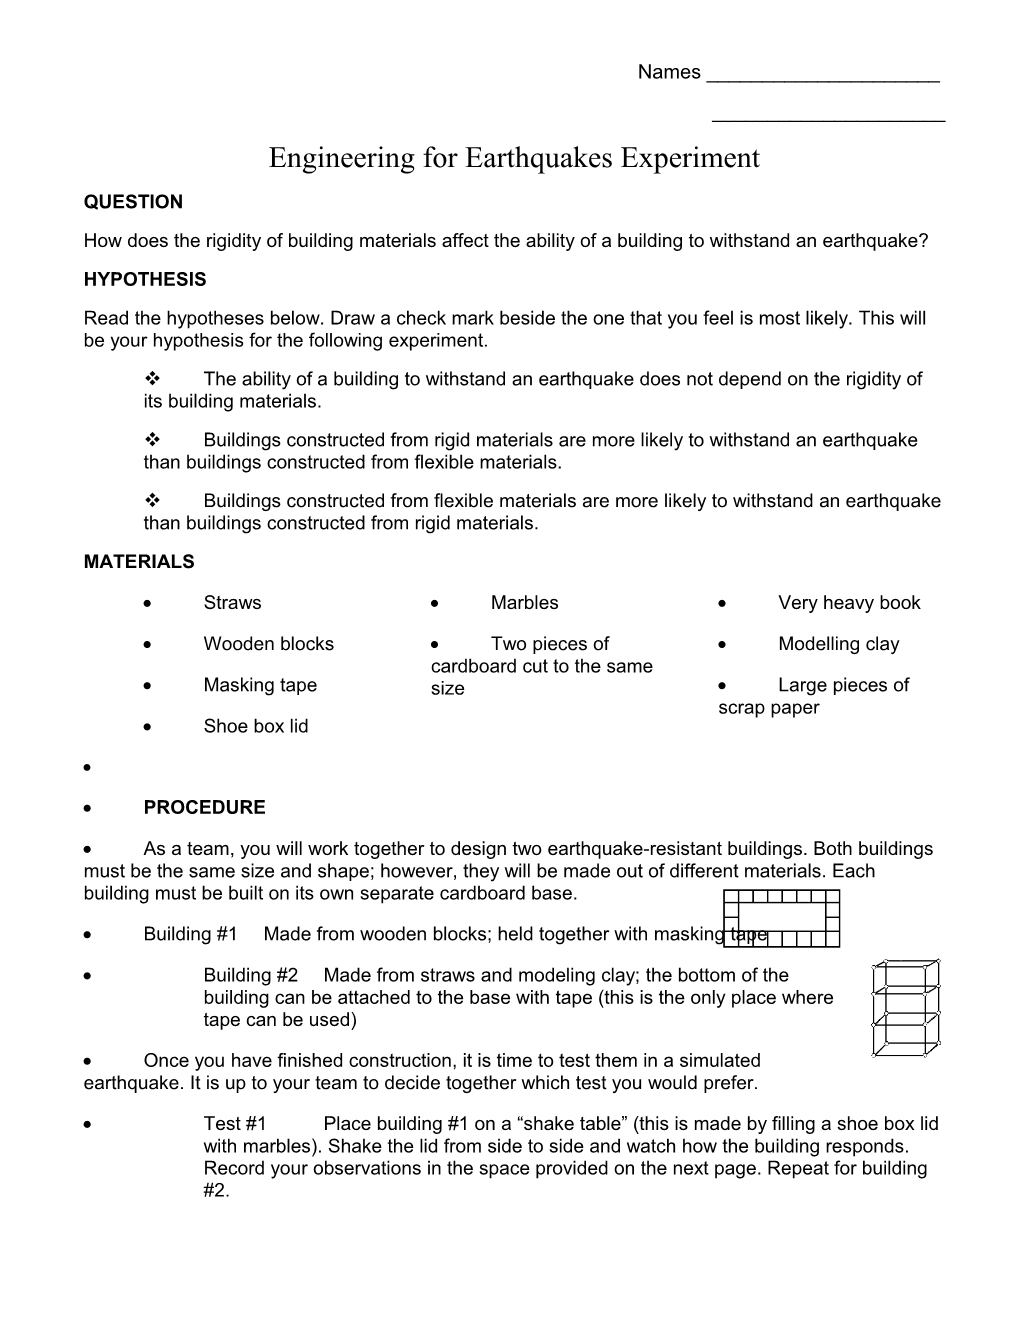 Engineering for Earthquakes Experiment